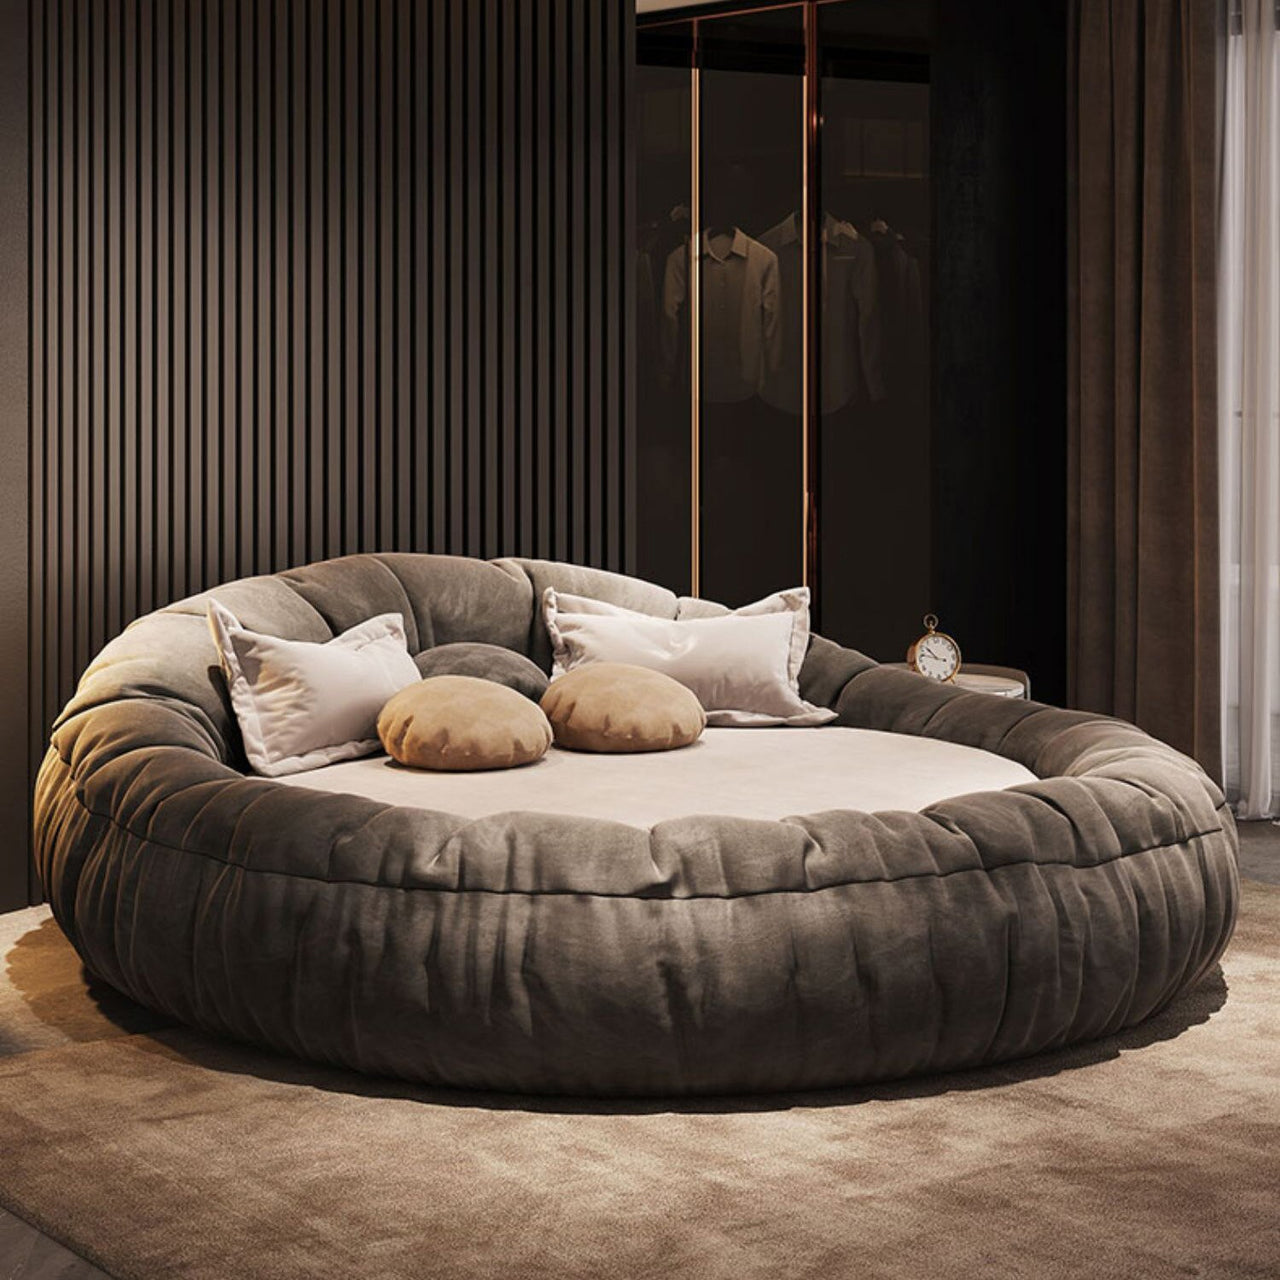 Round Bed for Couples - Italian Minimalist